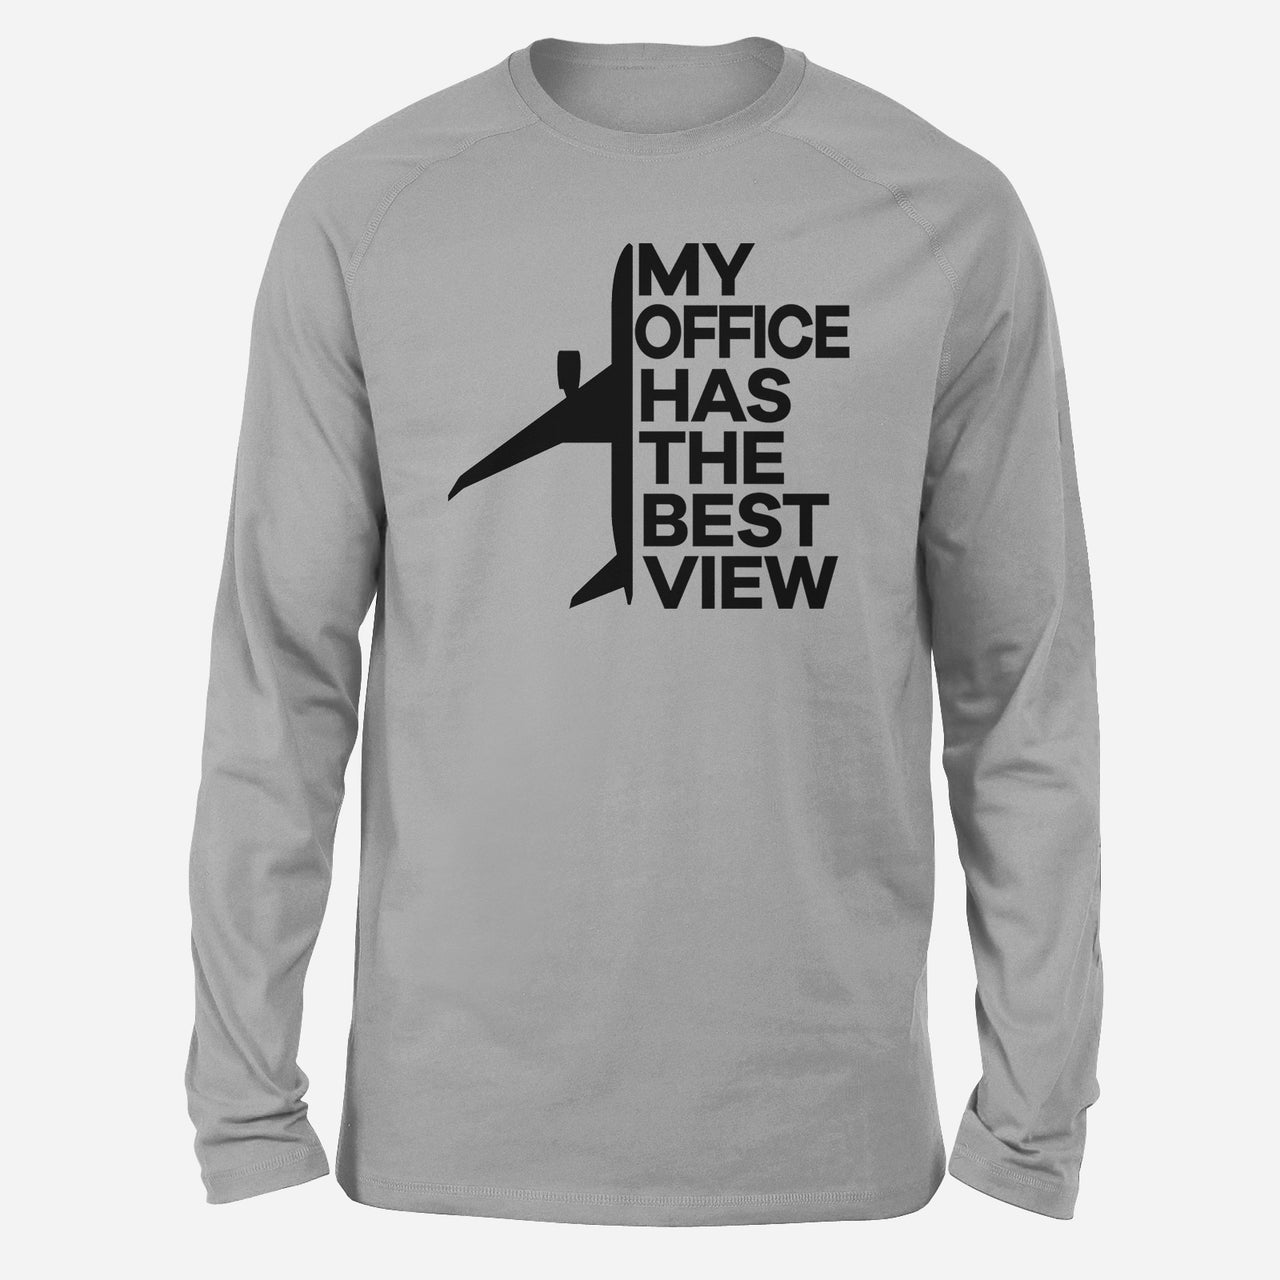 My Office Has The Best View Designed Long-Sleeve T-Shirts